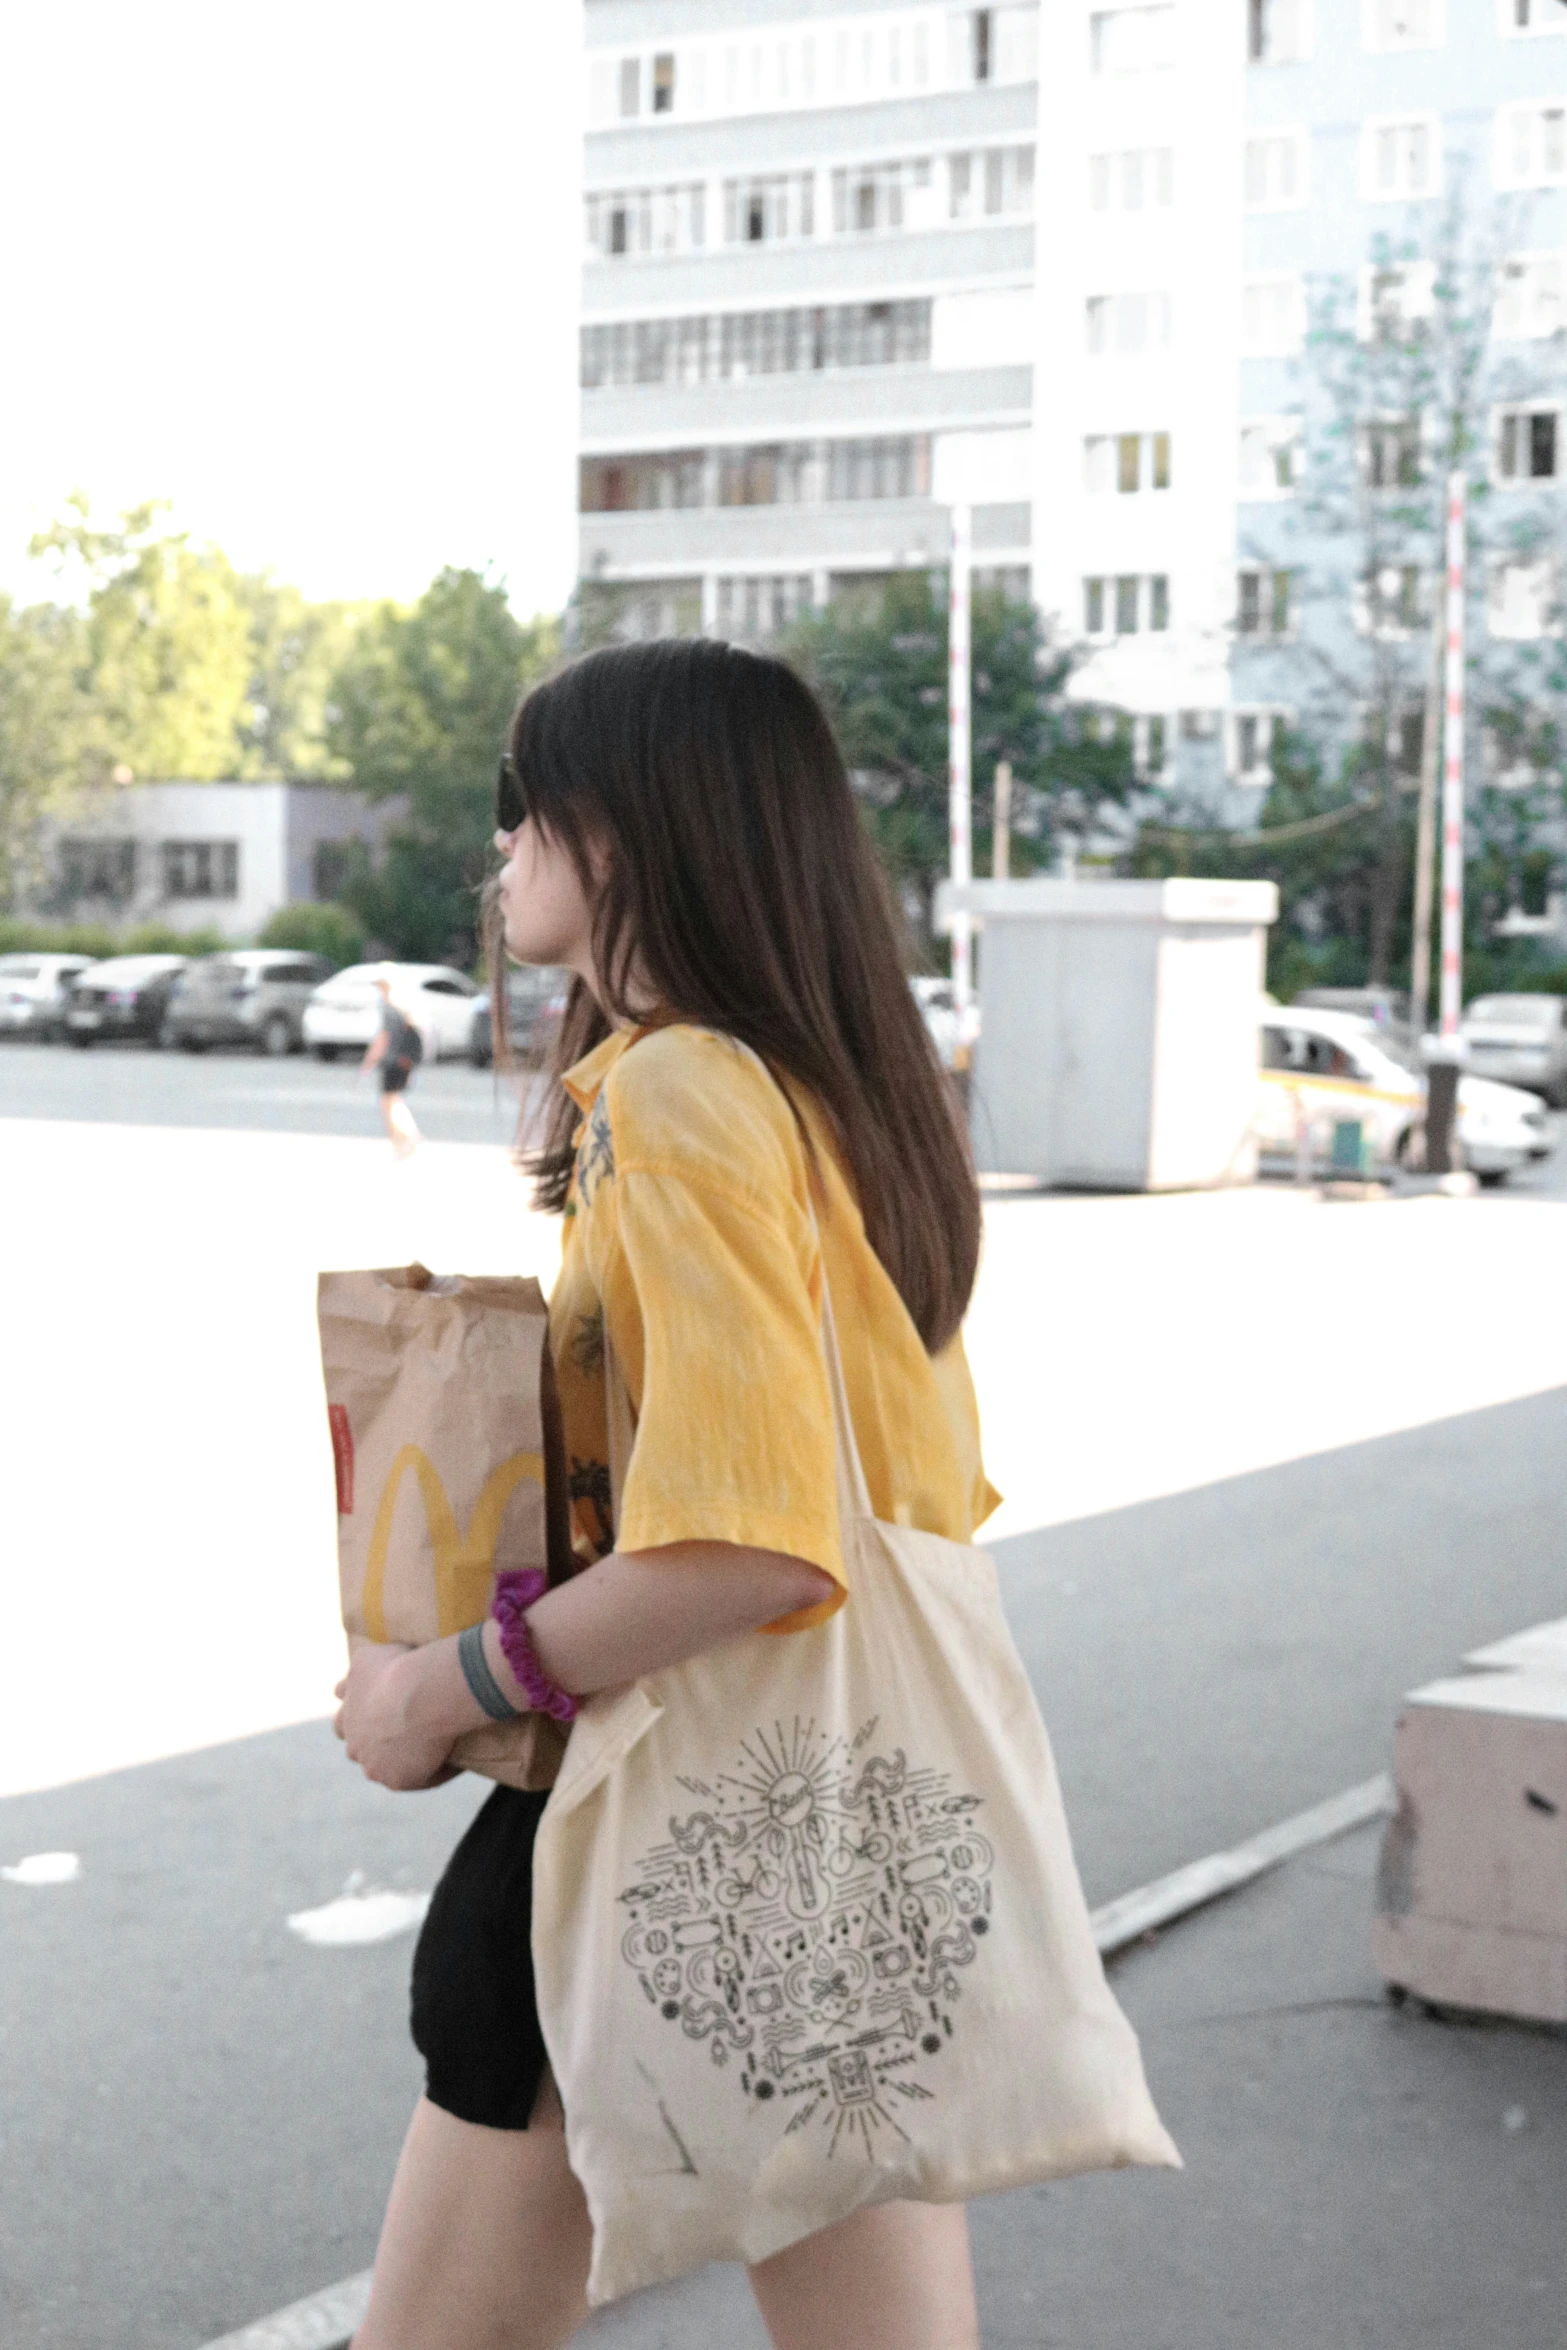 there is a young woman walking down the street with a shopping bag